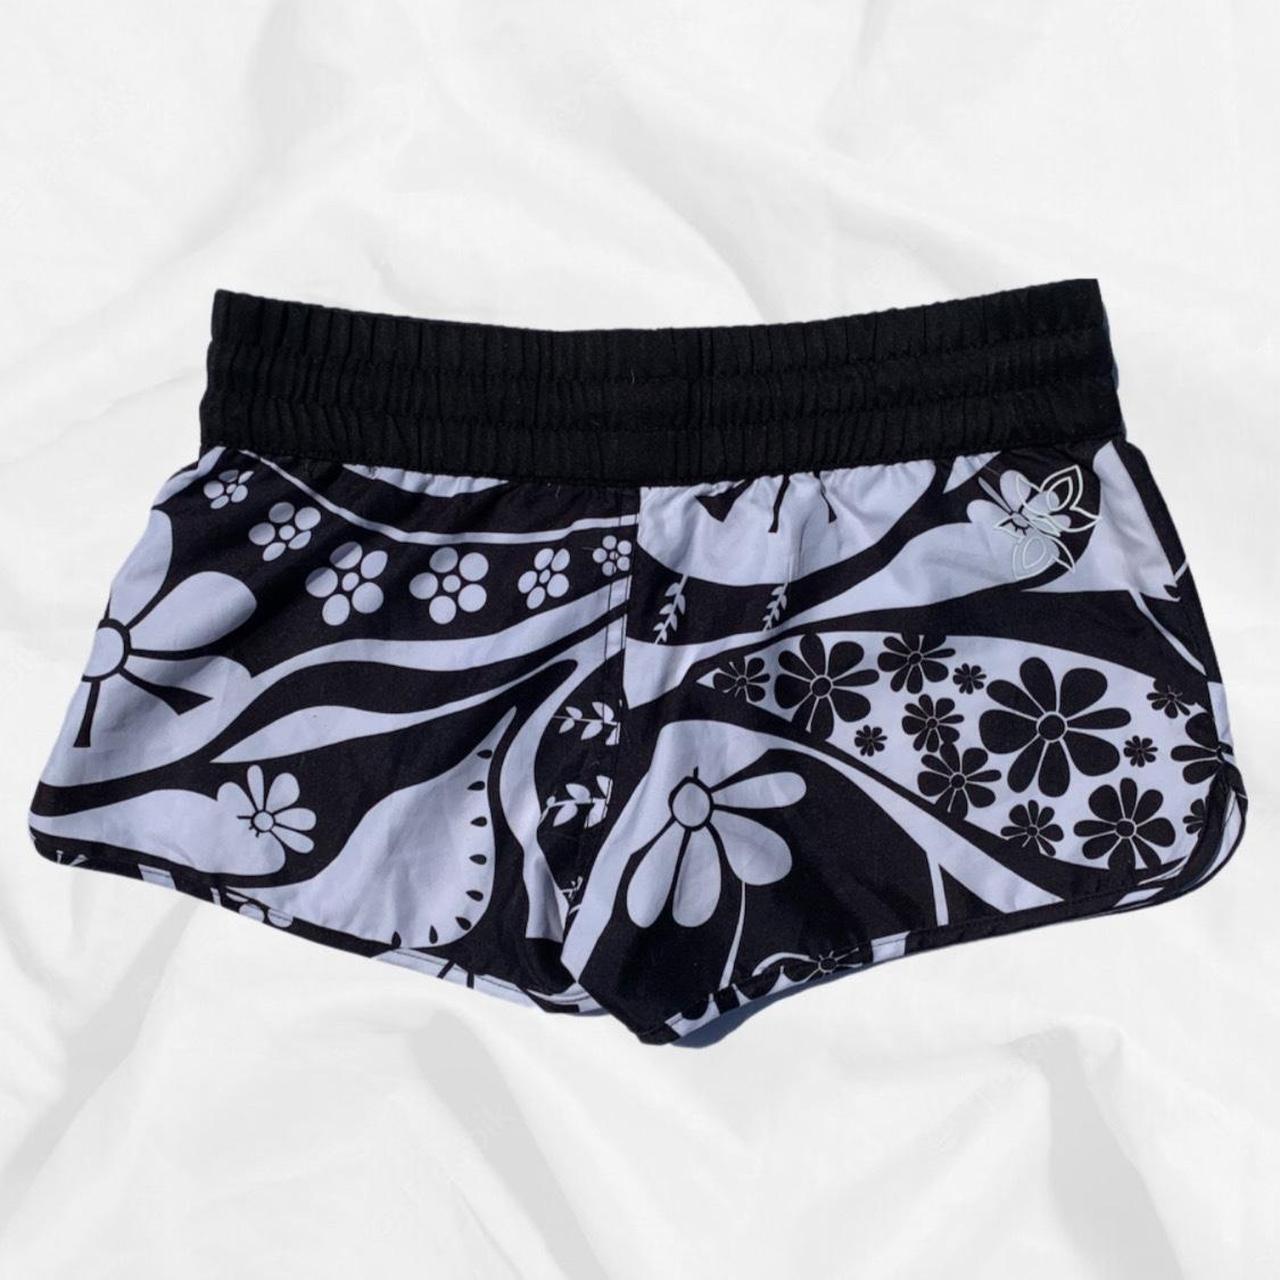 Product Image 2 - Oxbow Hibiscus Beach Shorts

Labelled as